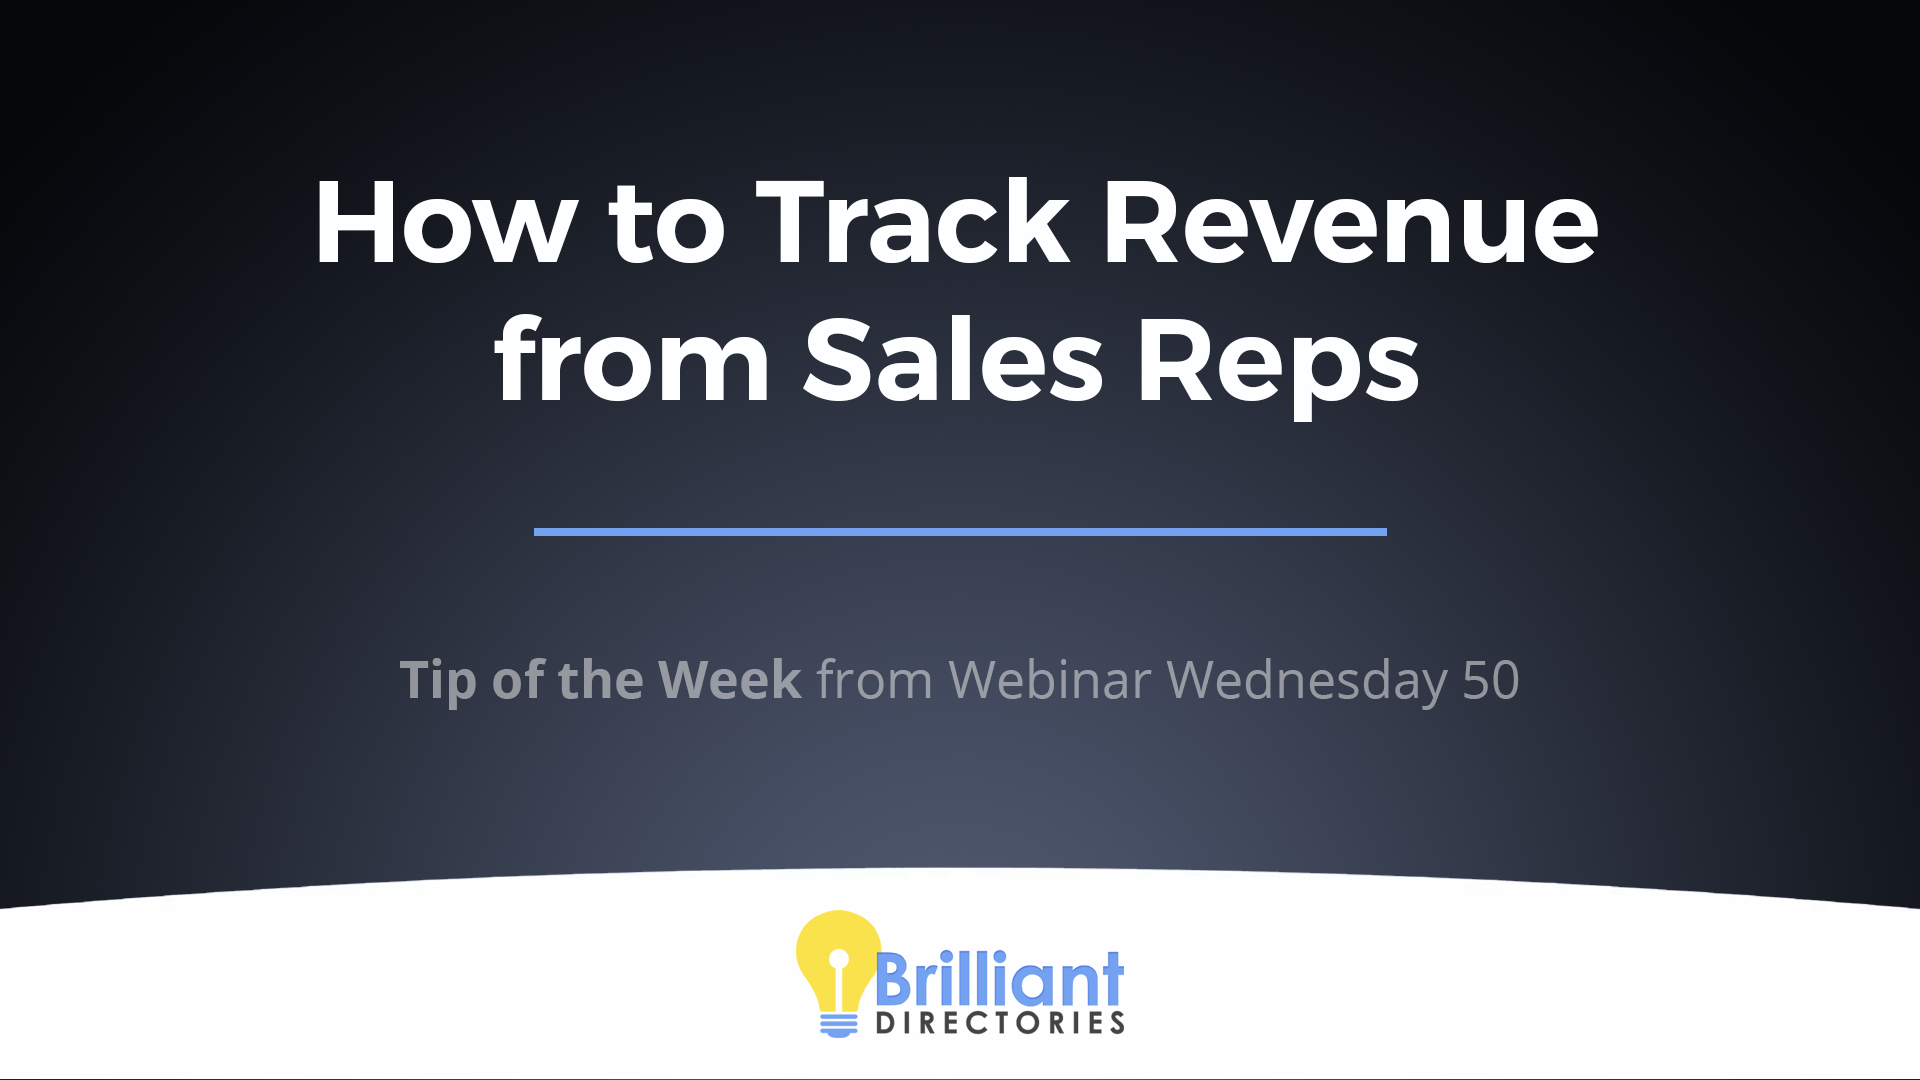 How to Track Revenue from Sales Reps